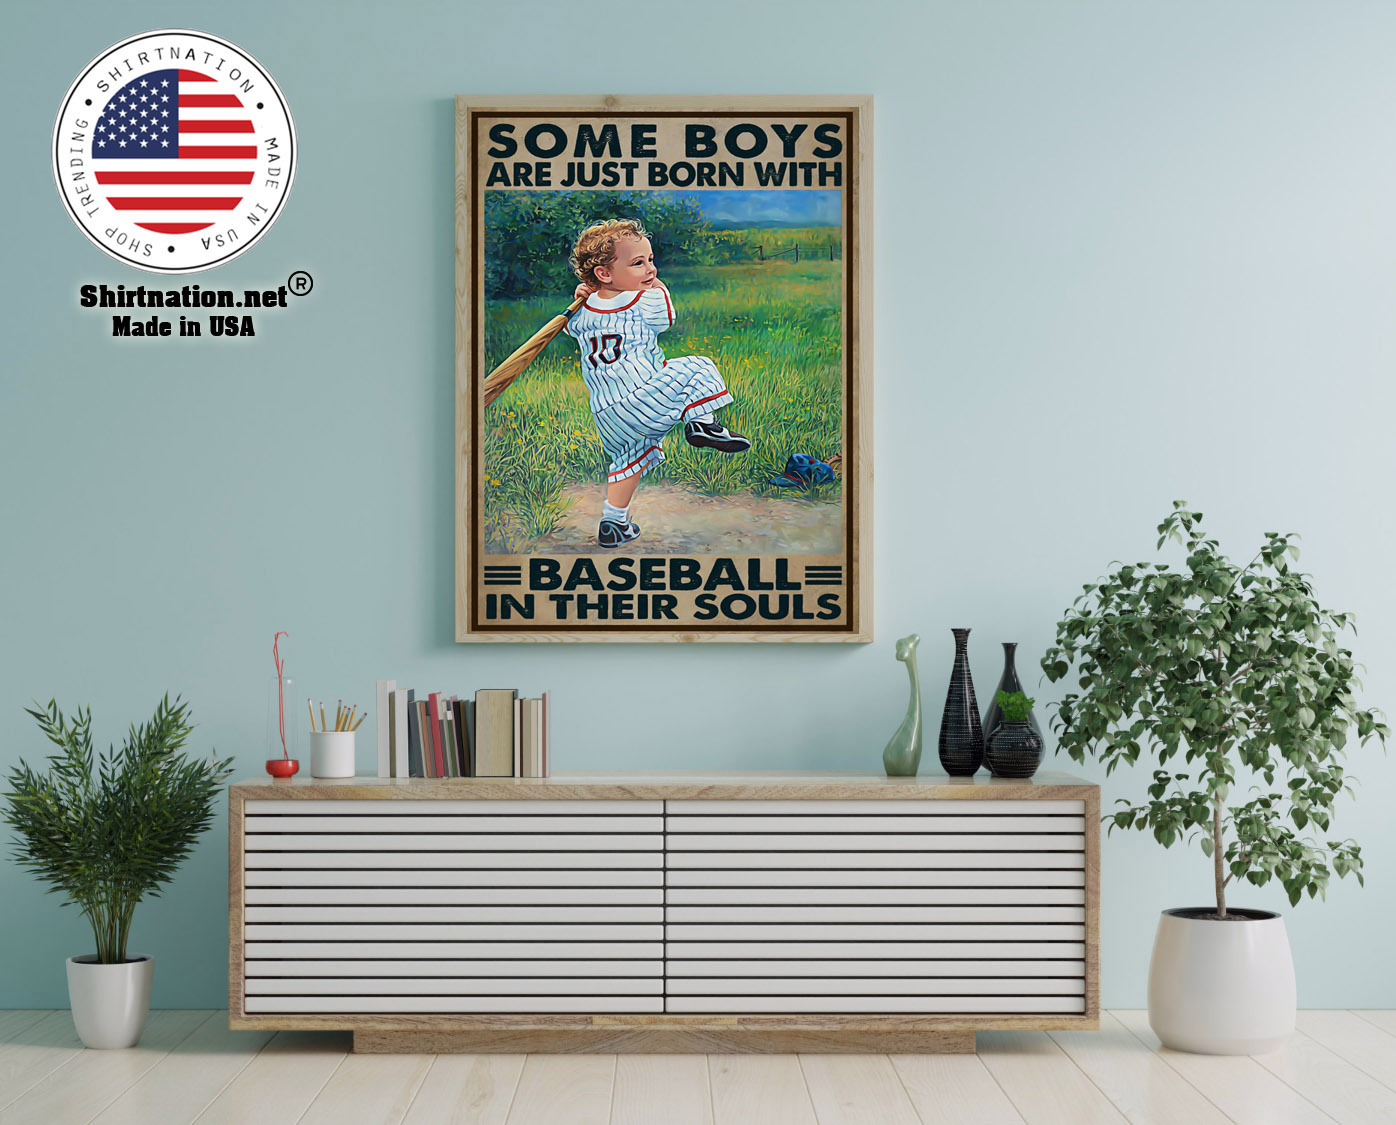 Some boys are just born with baseball in their souls poster 12